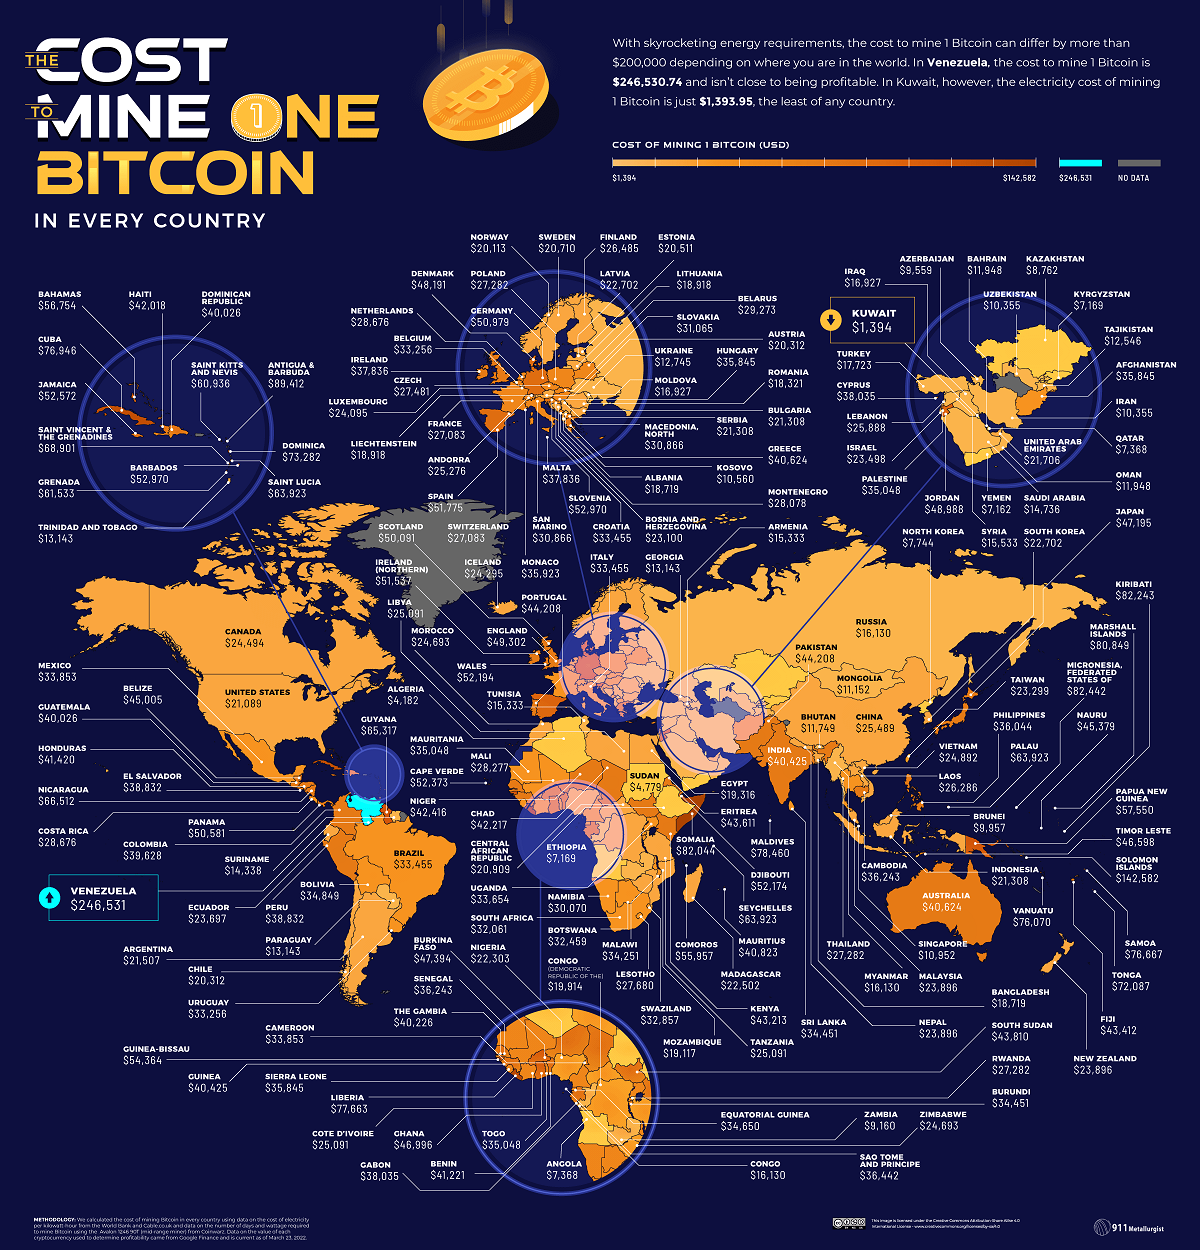 How Long Does It Take to Mine 1 Bitcoin? []